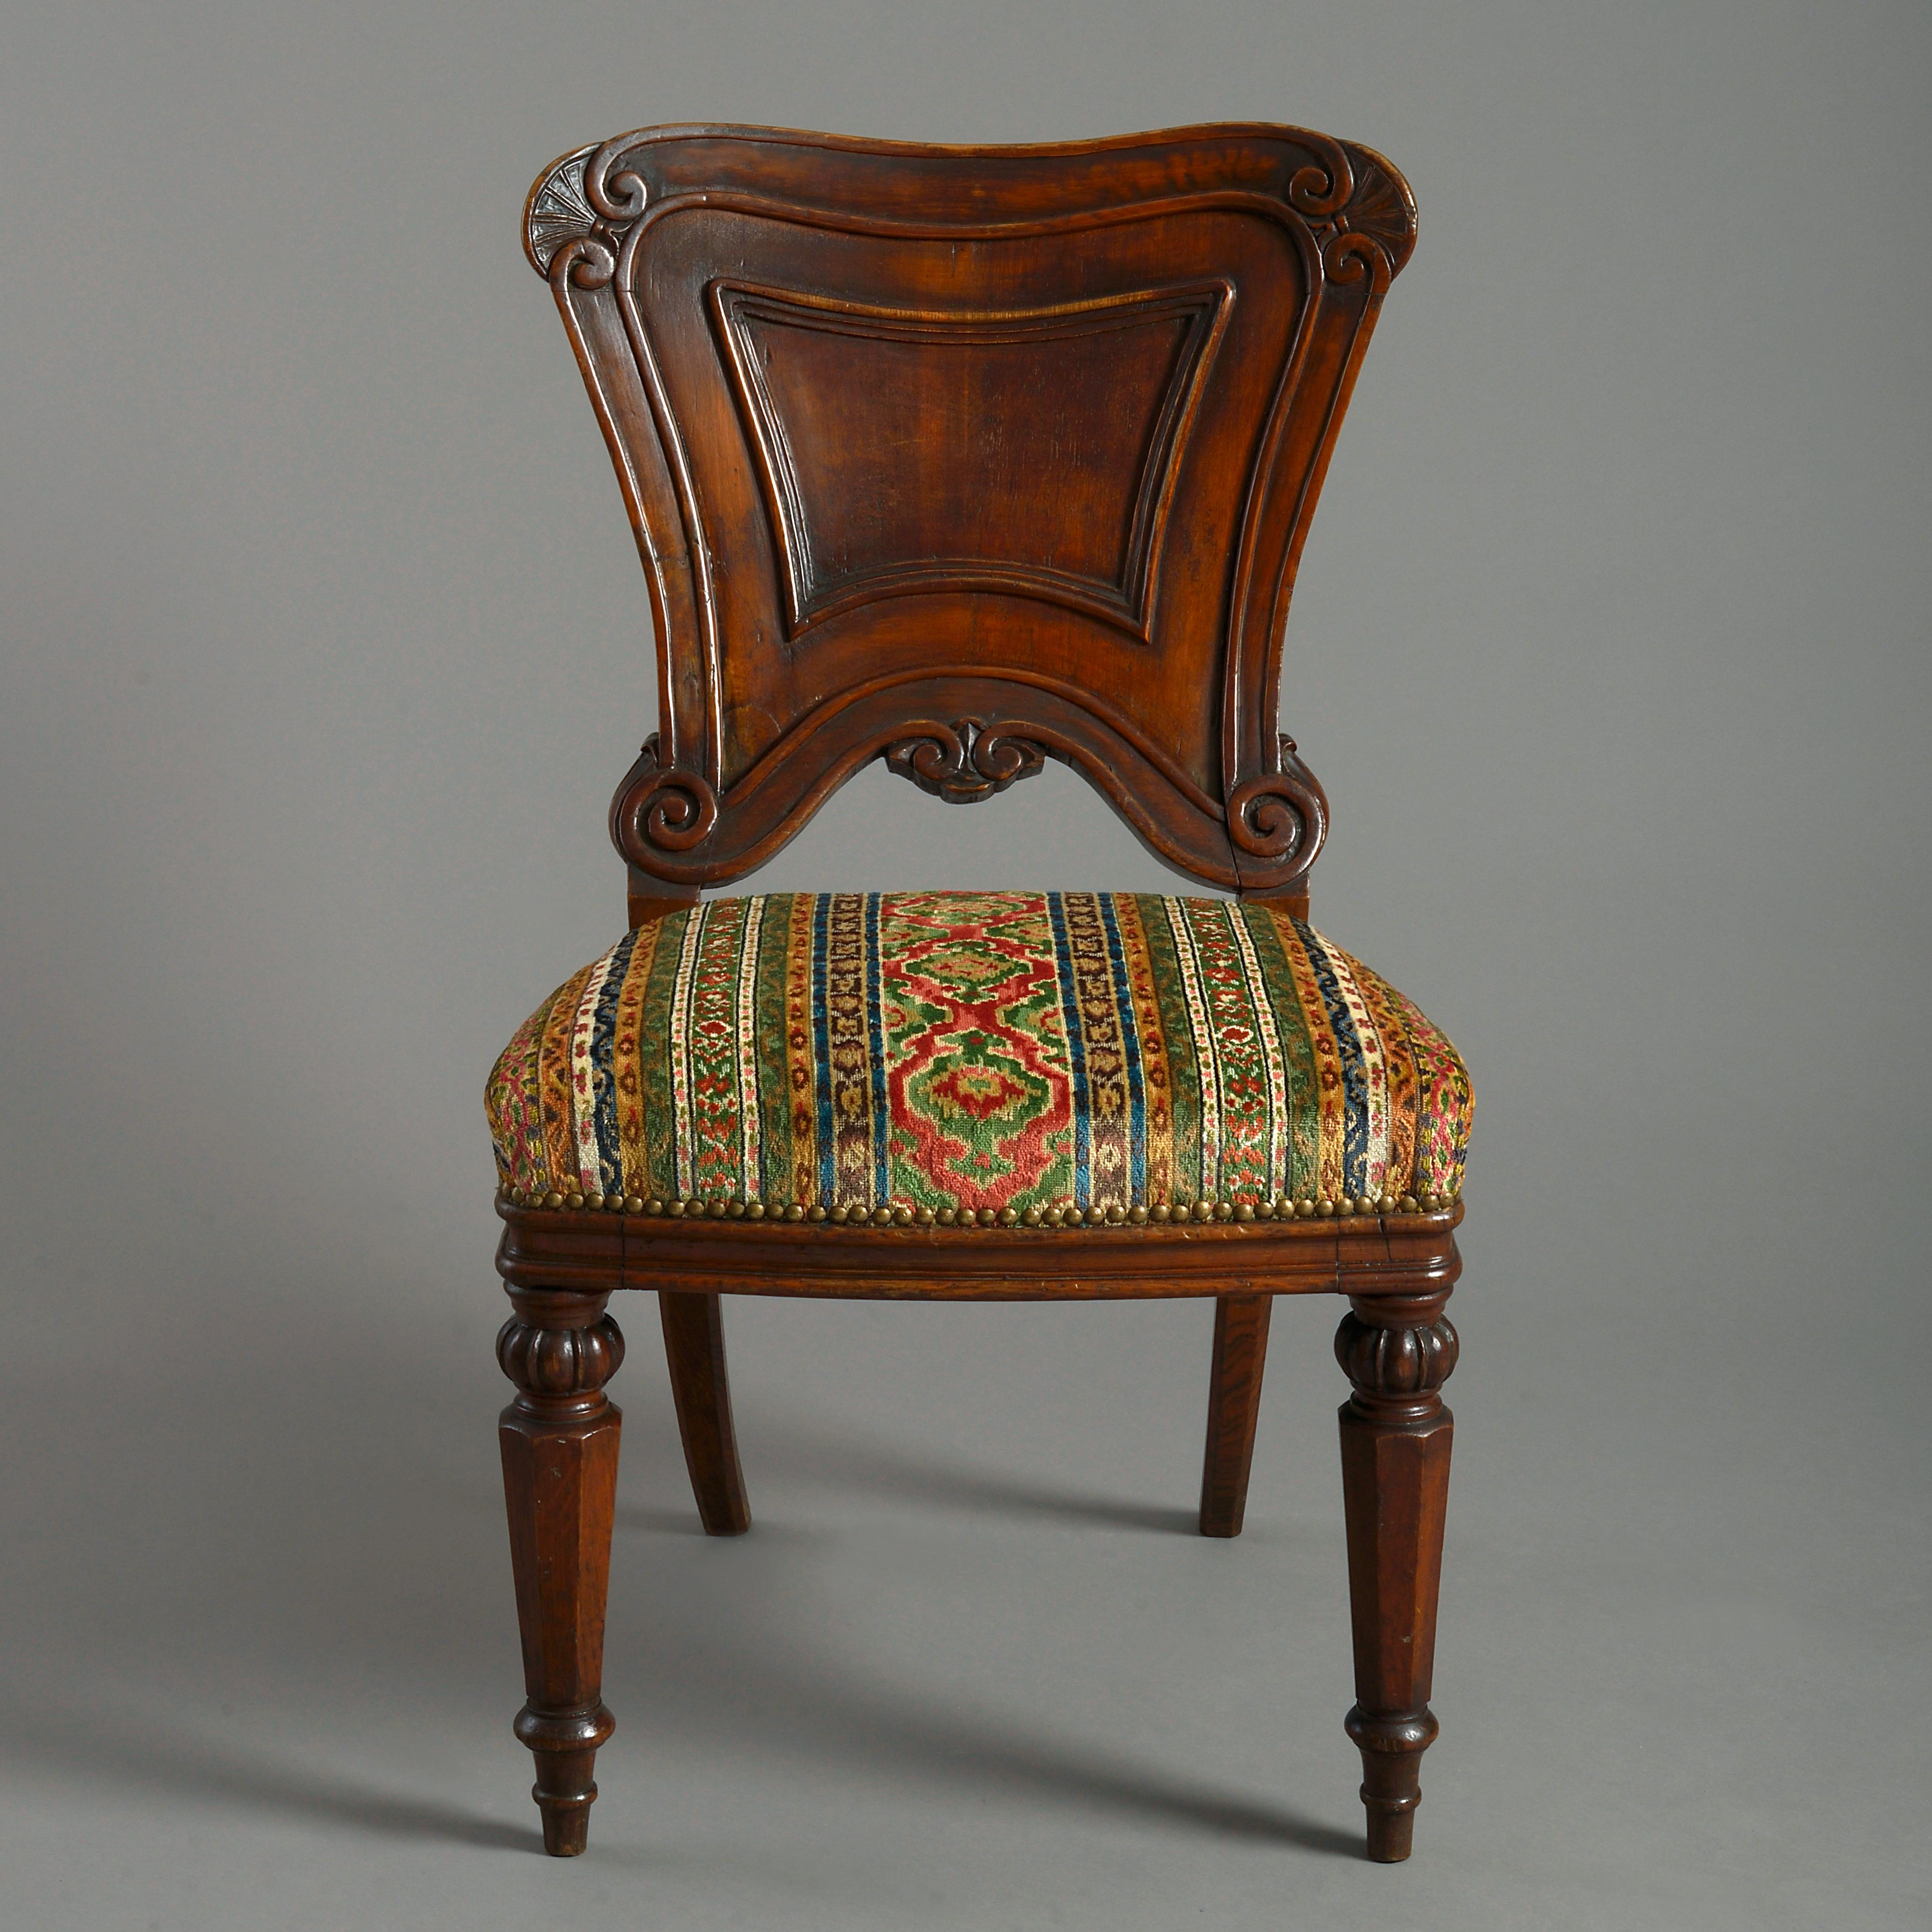 A mid-19th century Victorian Period oak side chair, the generously carved cartouche back set upon an upholstered seat and raised upon faceted turned legs.

Upholstered with Brunschwig & Fils Savonnerie Velvet Fresco Fabric.